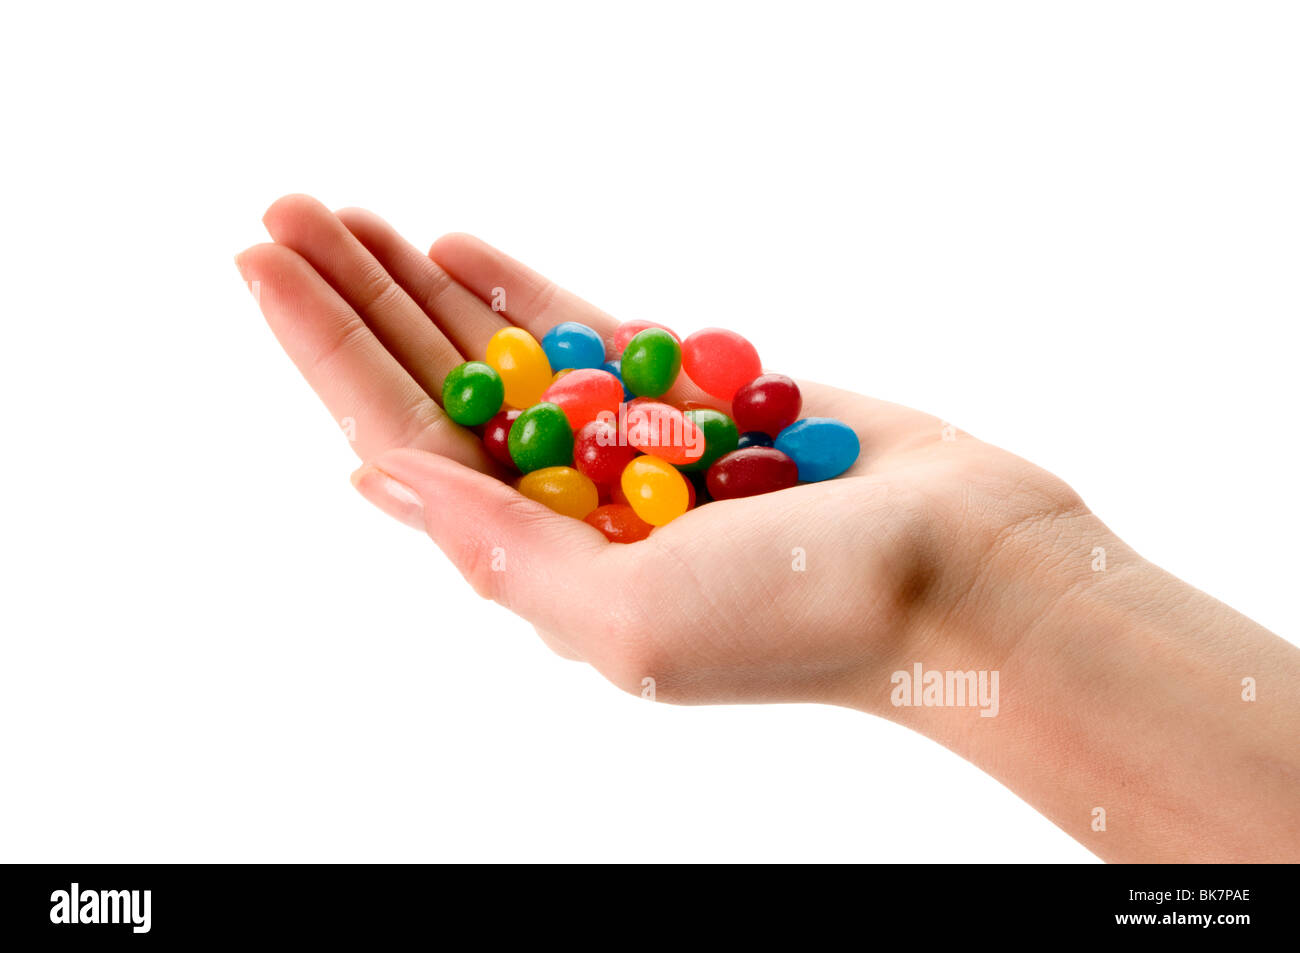 hand holding jelly beans Stock Photo